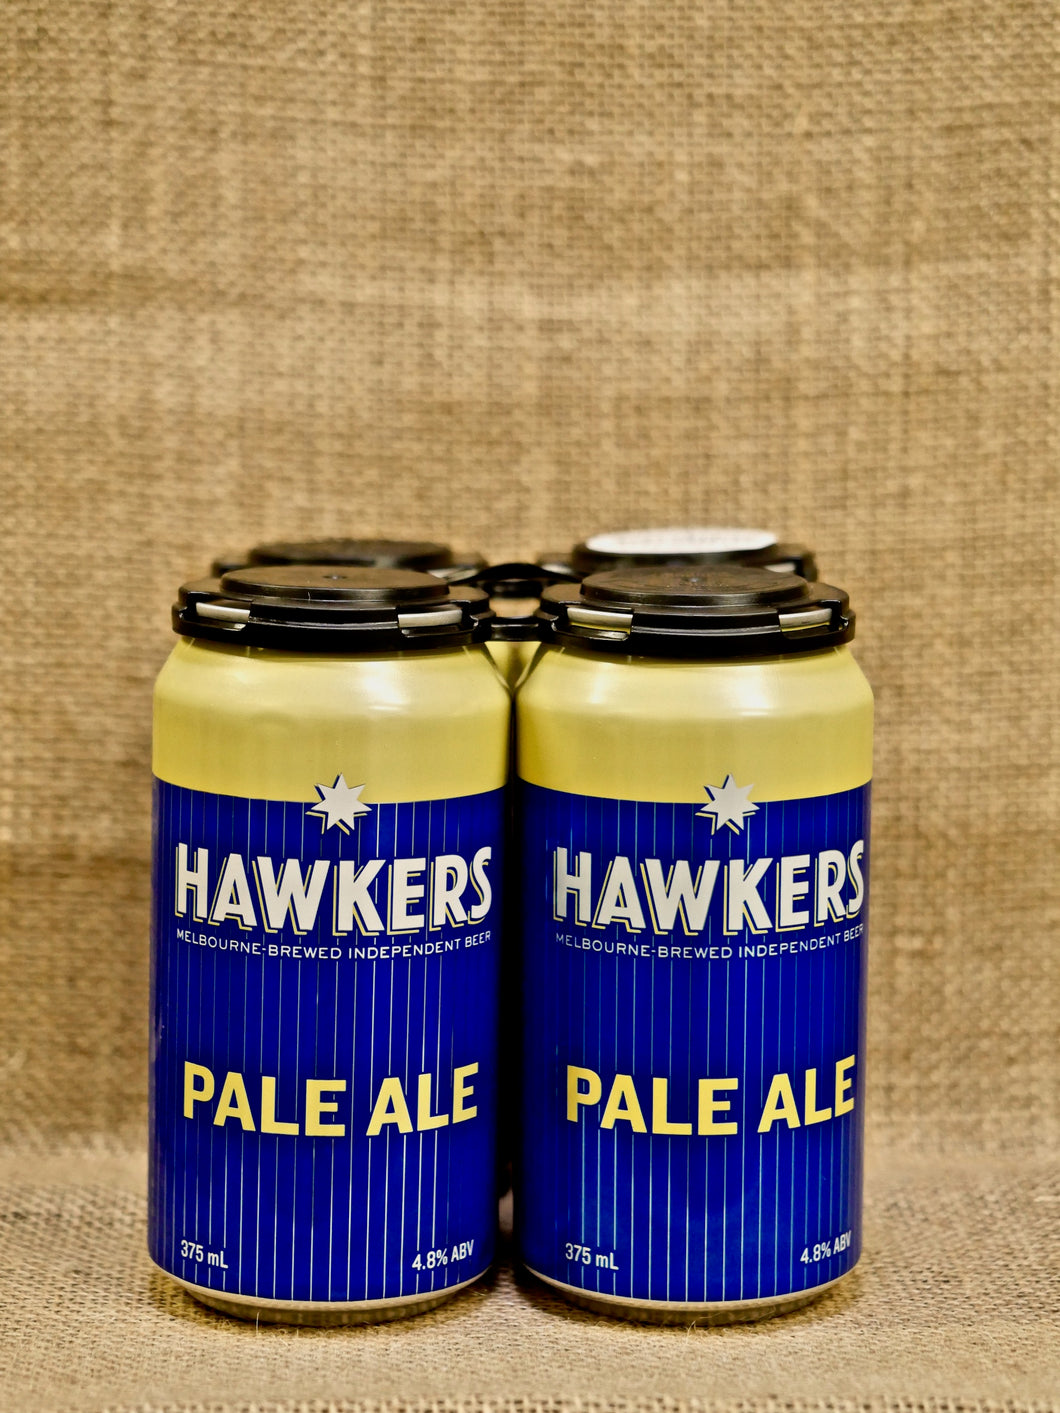 Hawkers Pale Ale